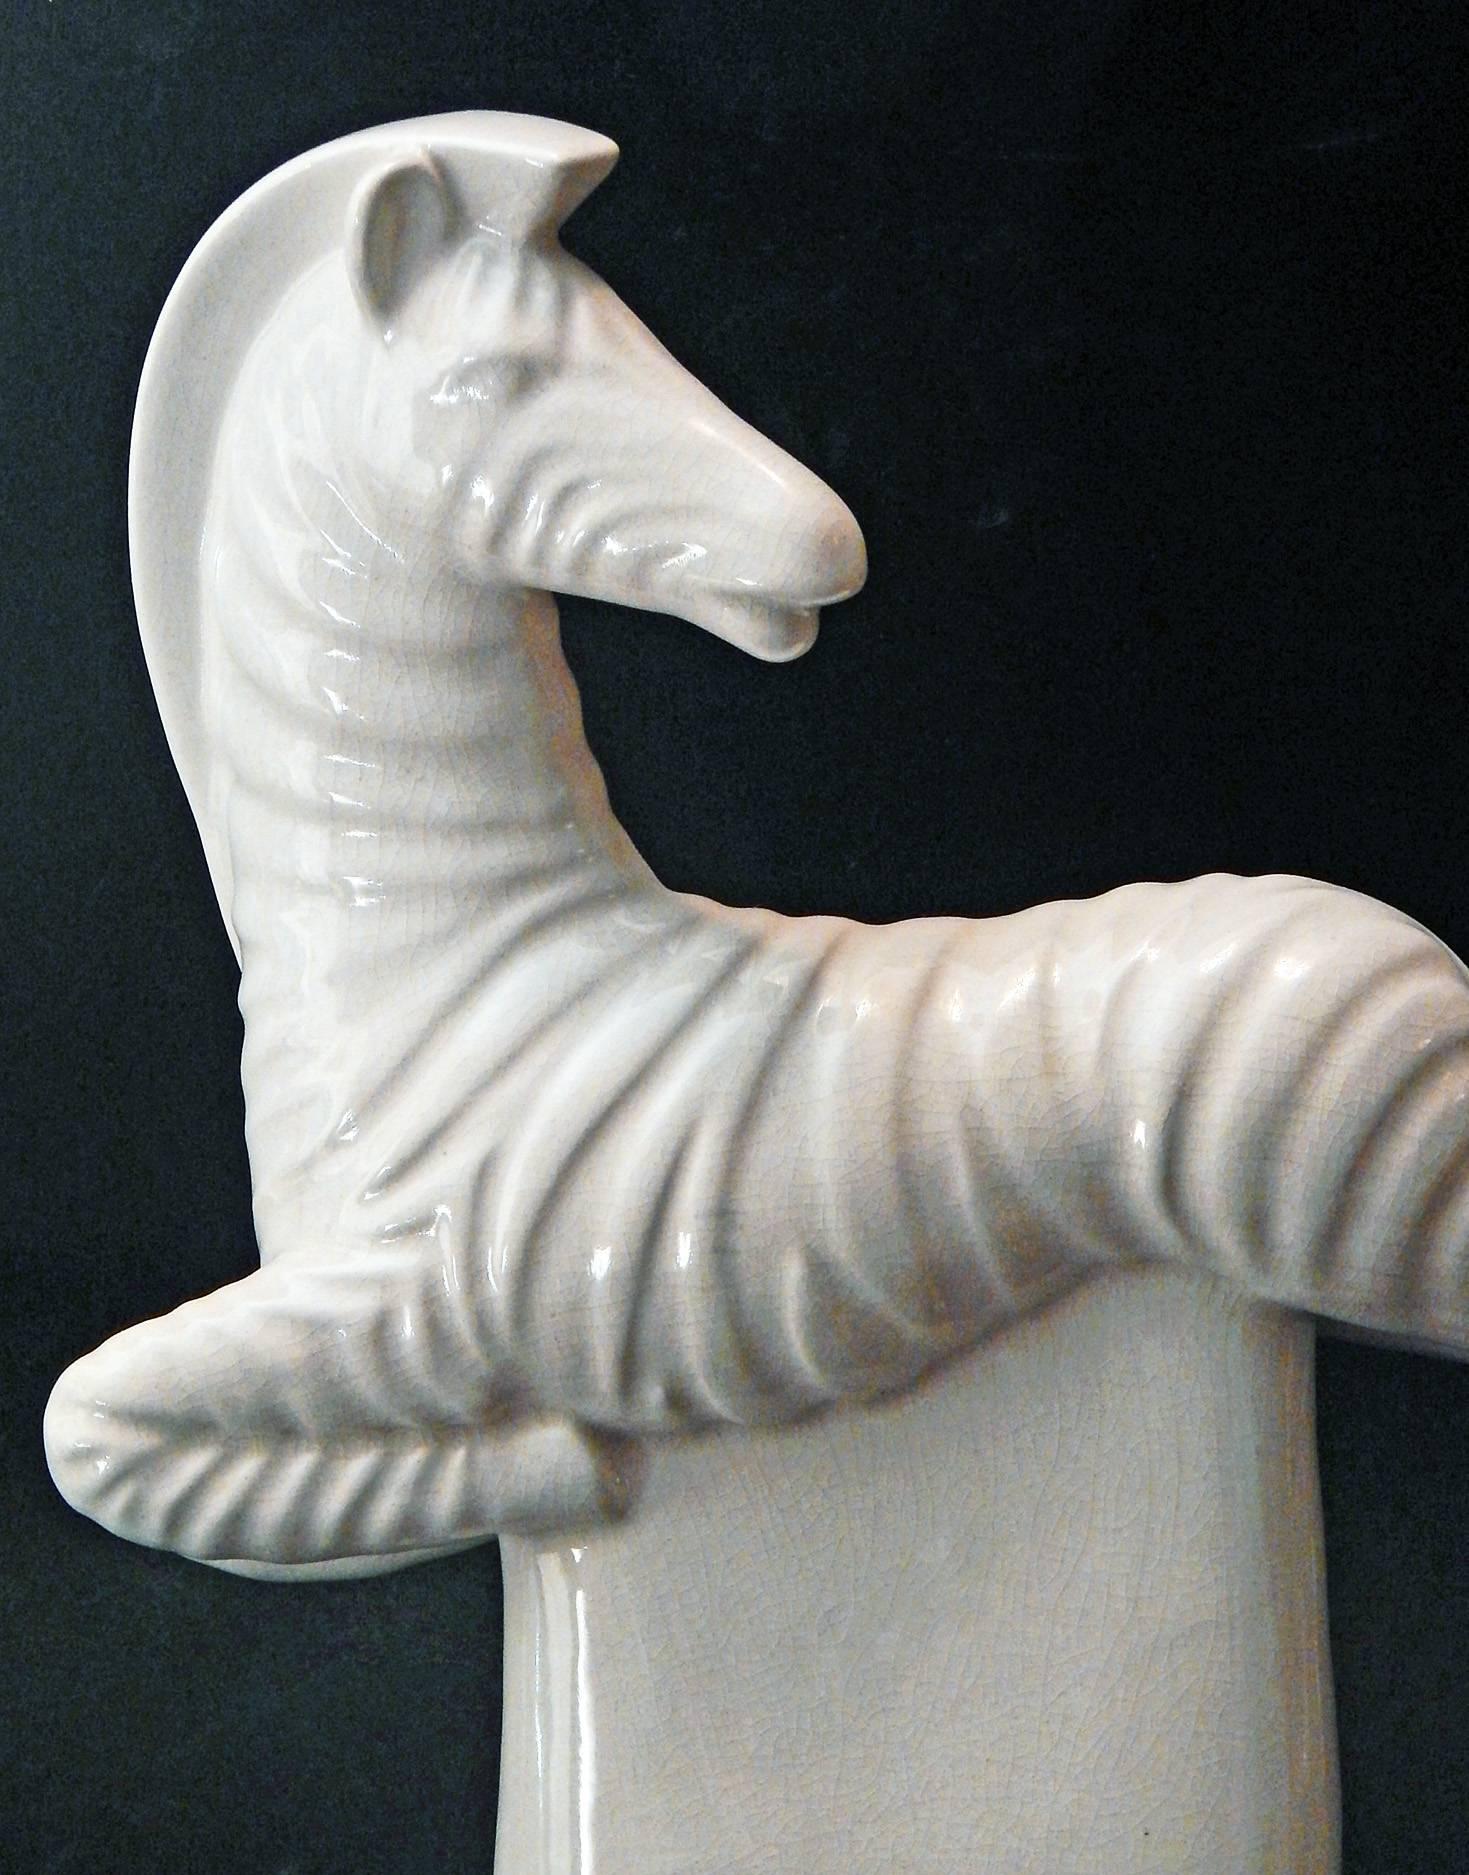 Full of energy and élan, this rare sculpture by Waylande Gregory, dating from the 1940s, depicts a zebra in mid-air, looking behind with elegant unconcern. The ceramic form is glazed in a lovely off-white glaze, and is mounted on a dark-stained